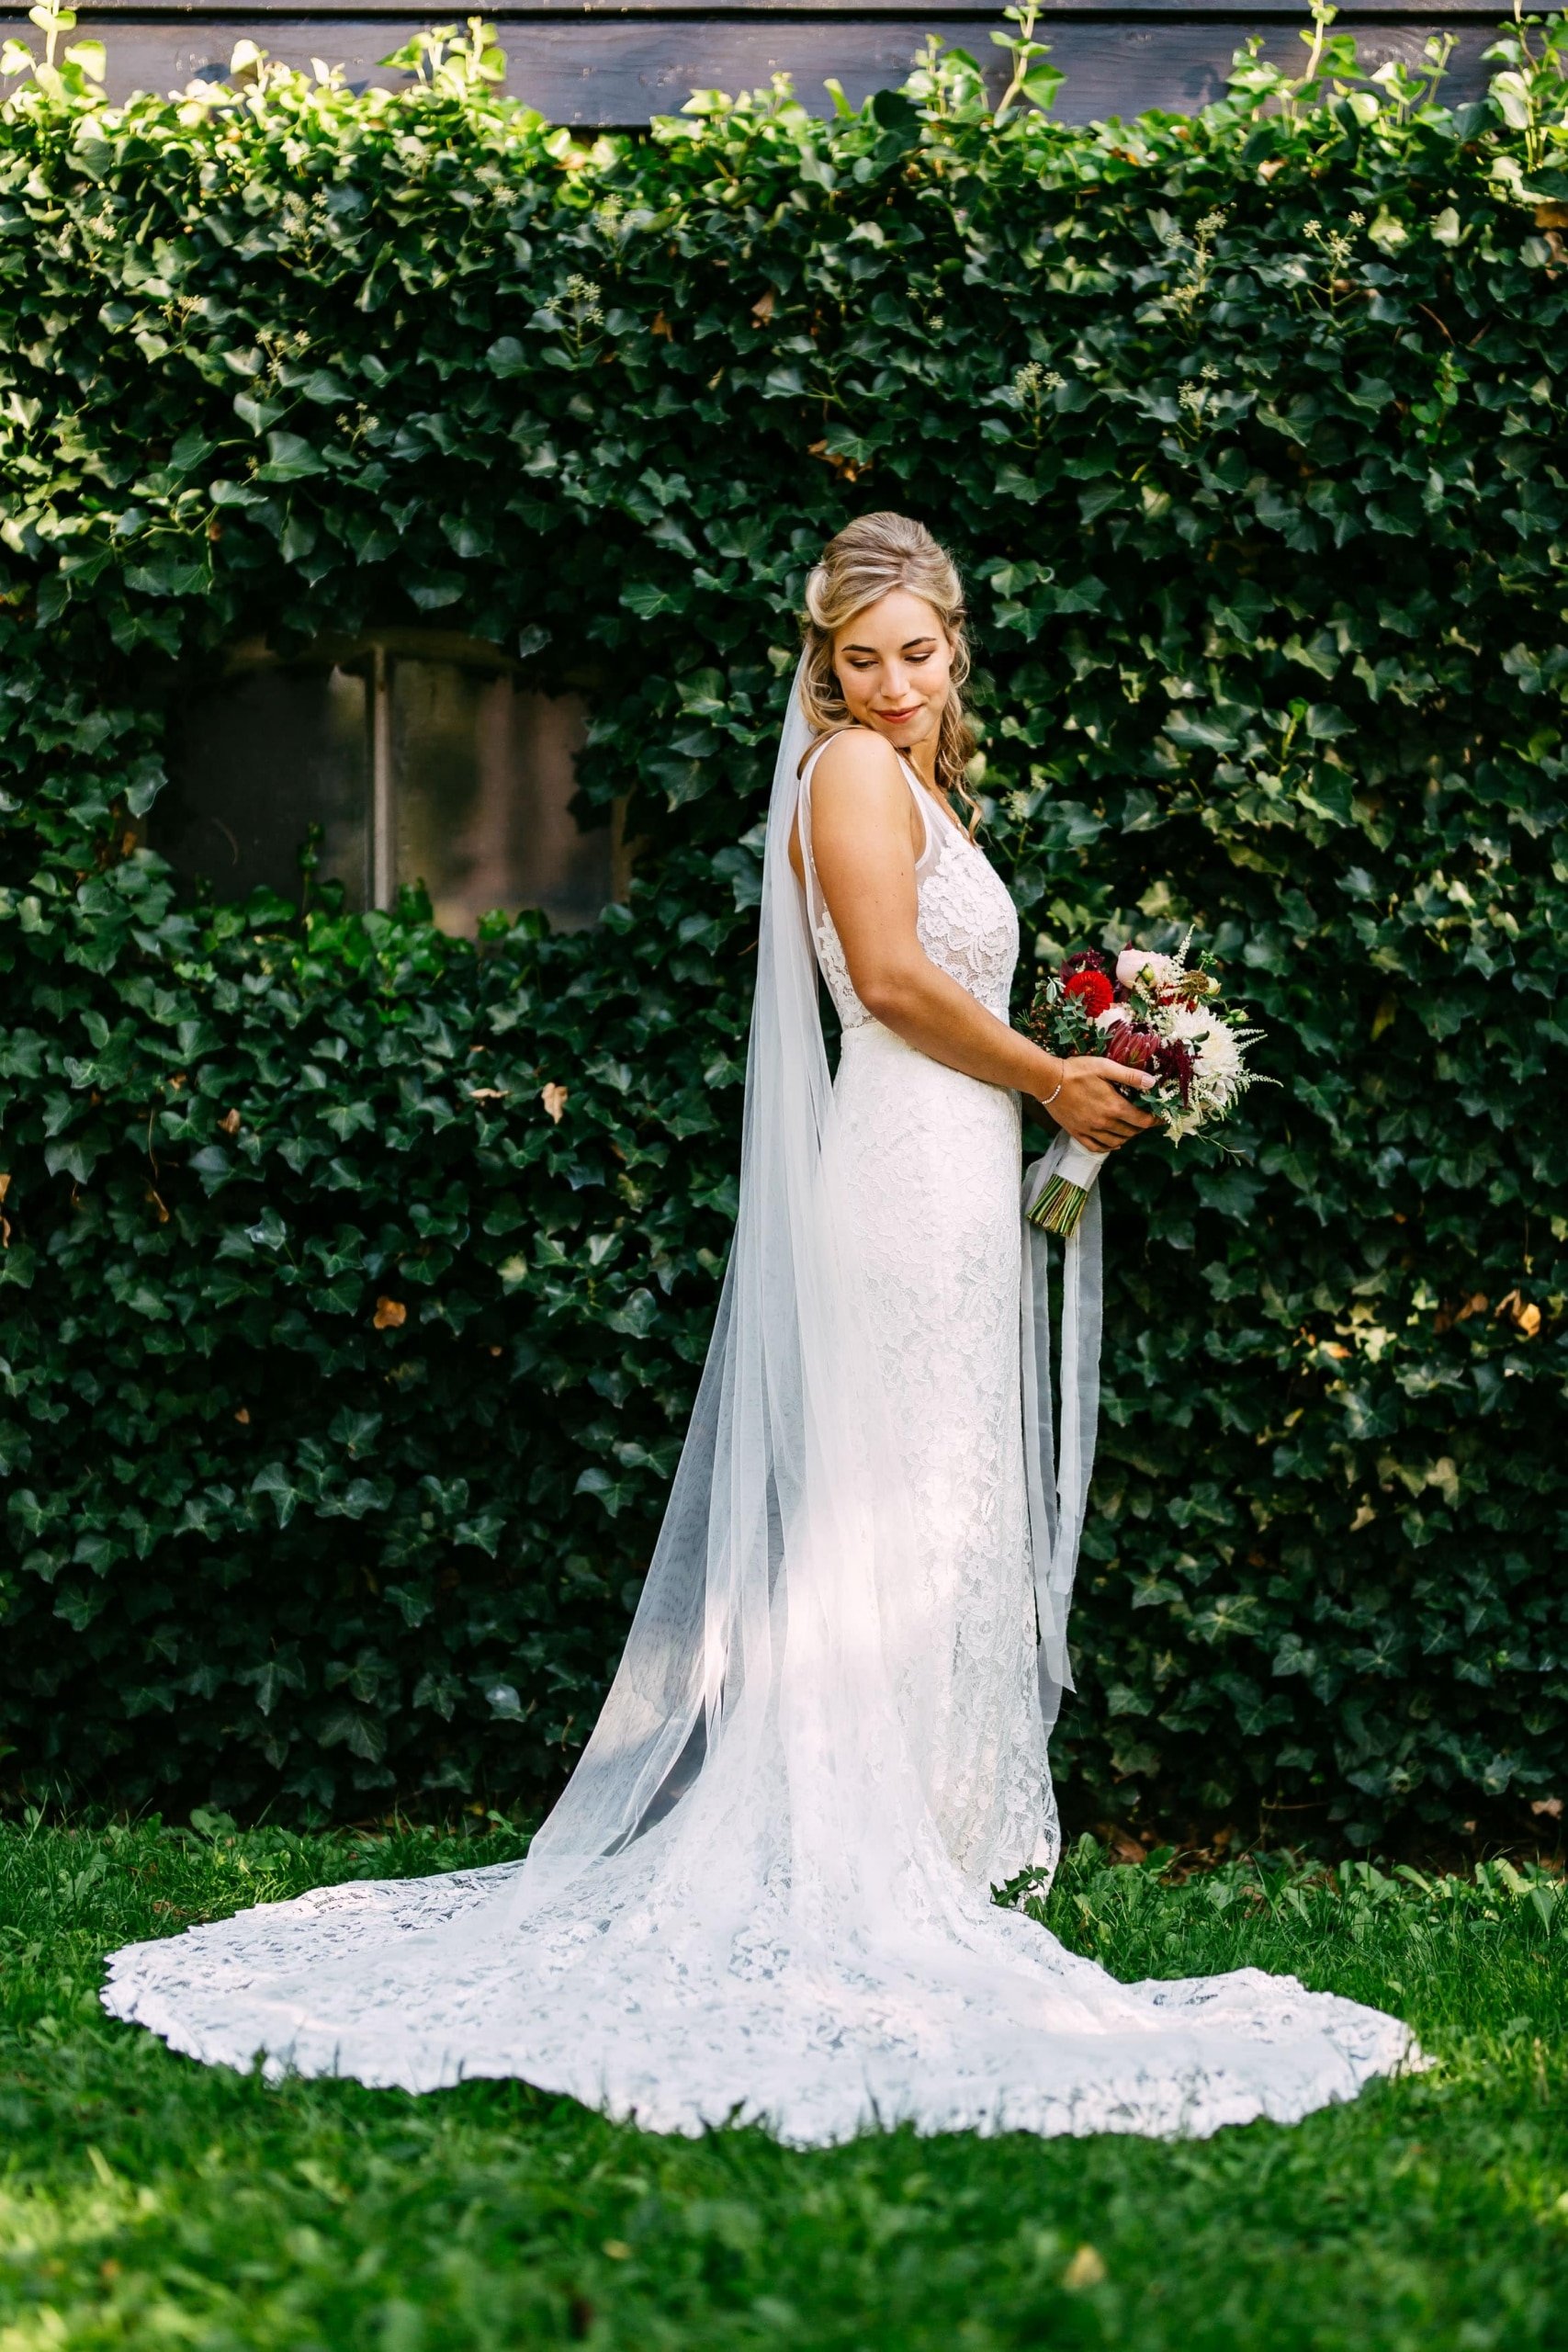 A bride poses in front of an ivy-covered wall.